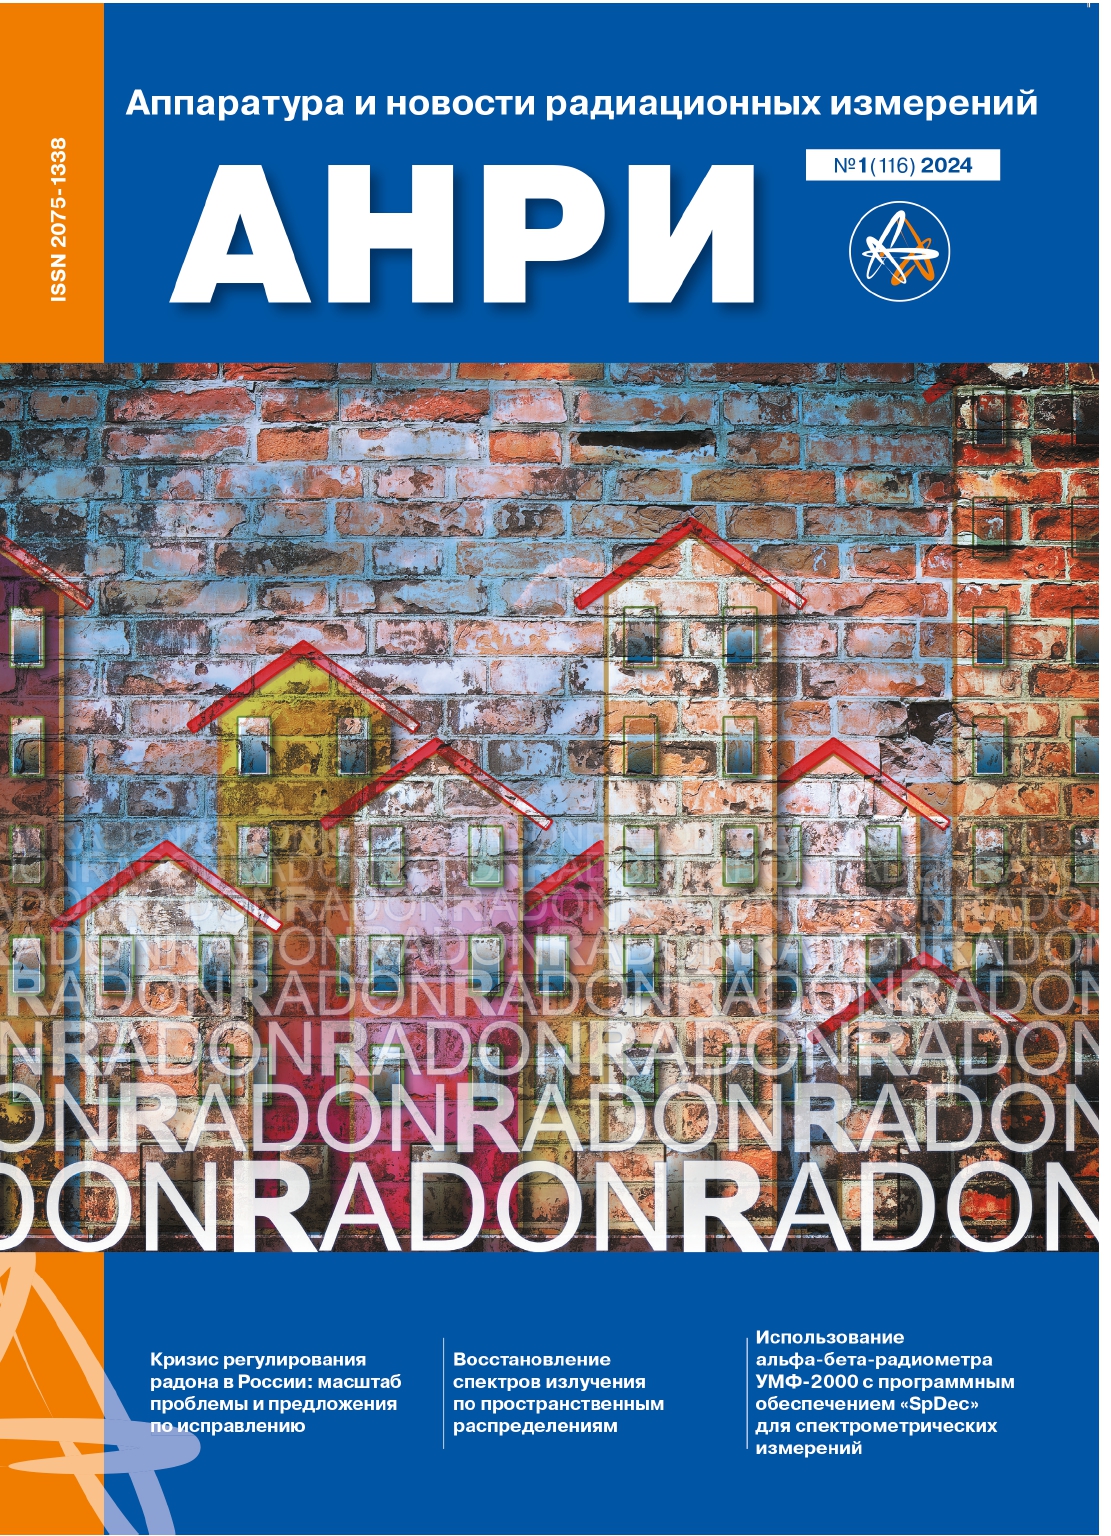                         Radon Regulation Crisis in Russia: Scale of the Problem and Proposals for Remediation
            